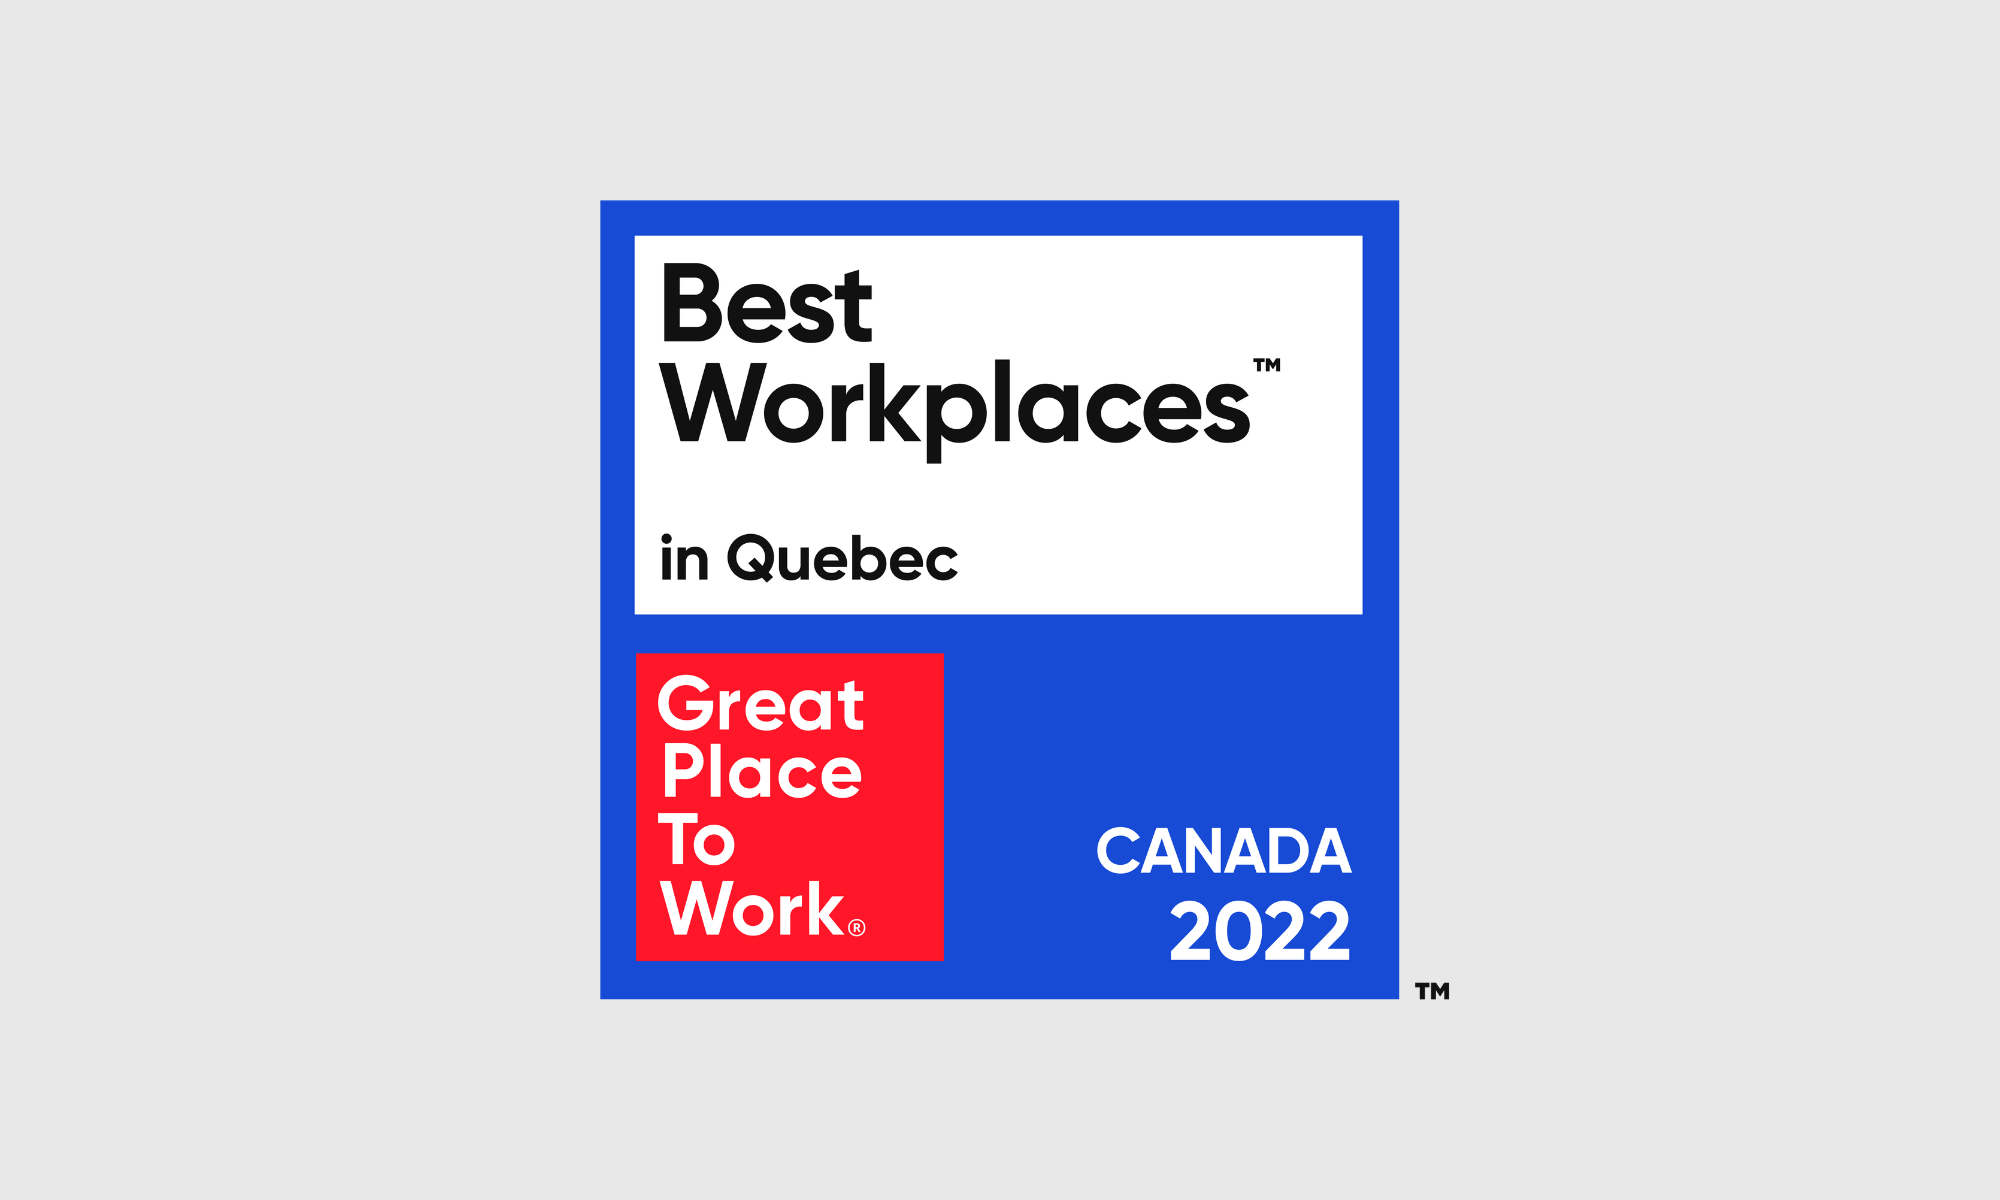 Symetris is one of the best workplaces in Quebec